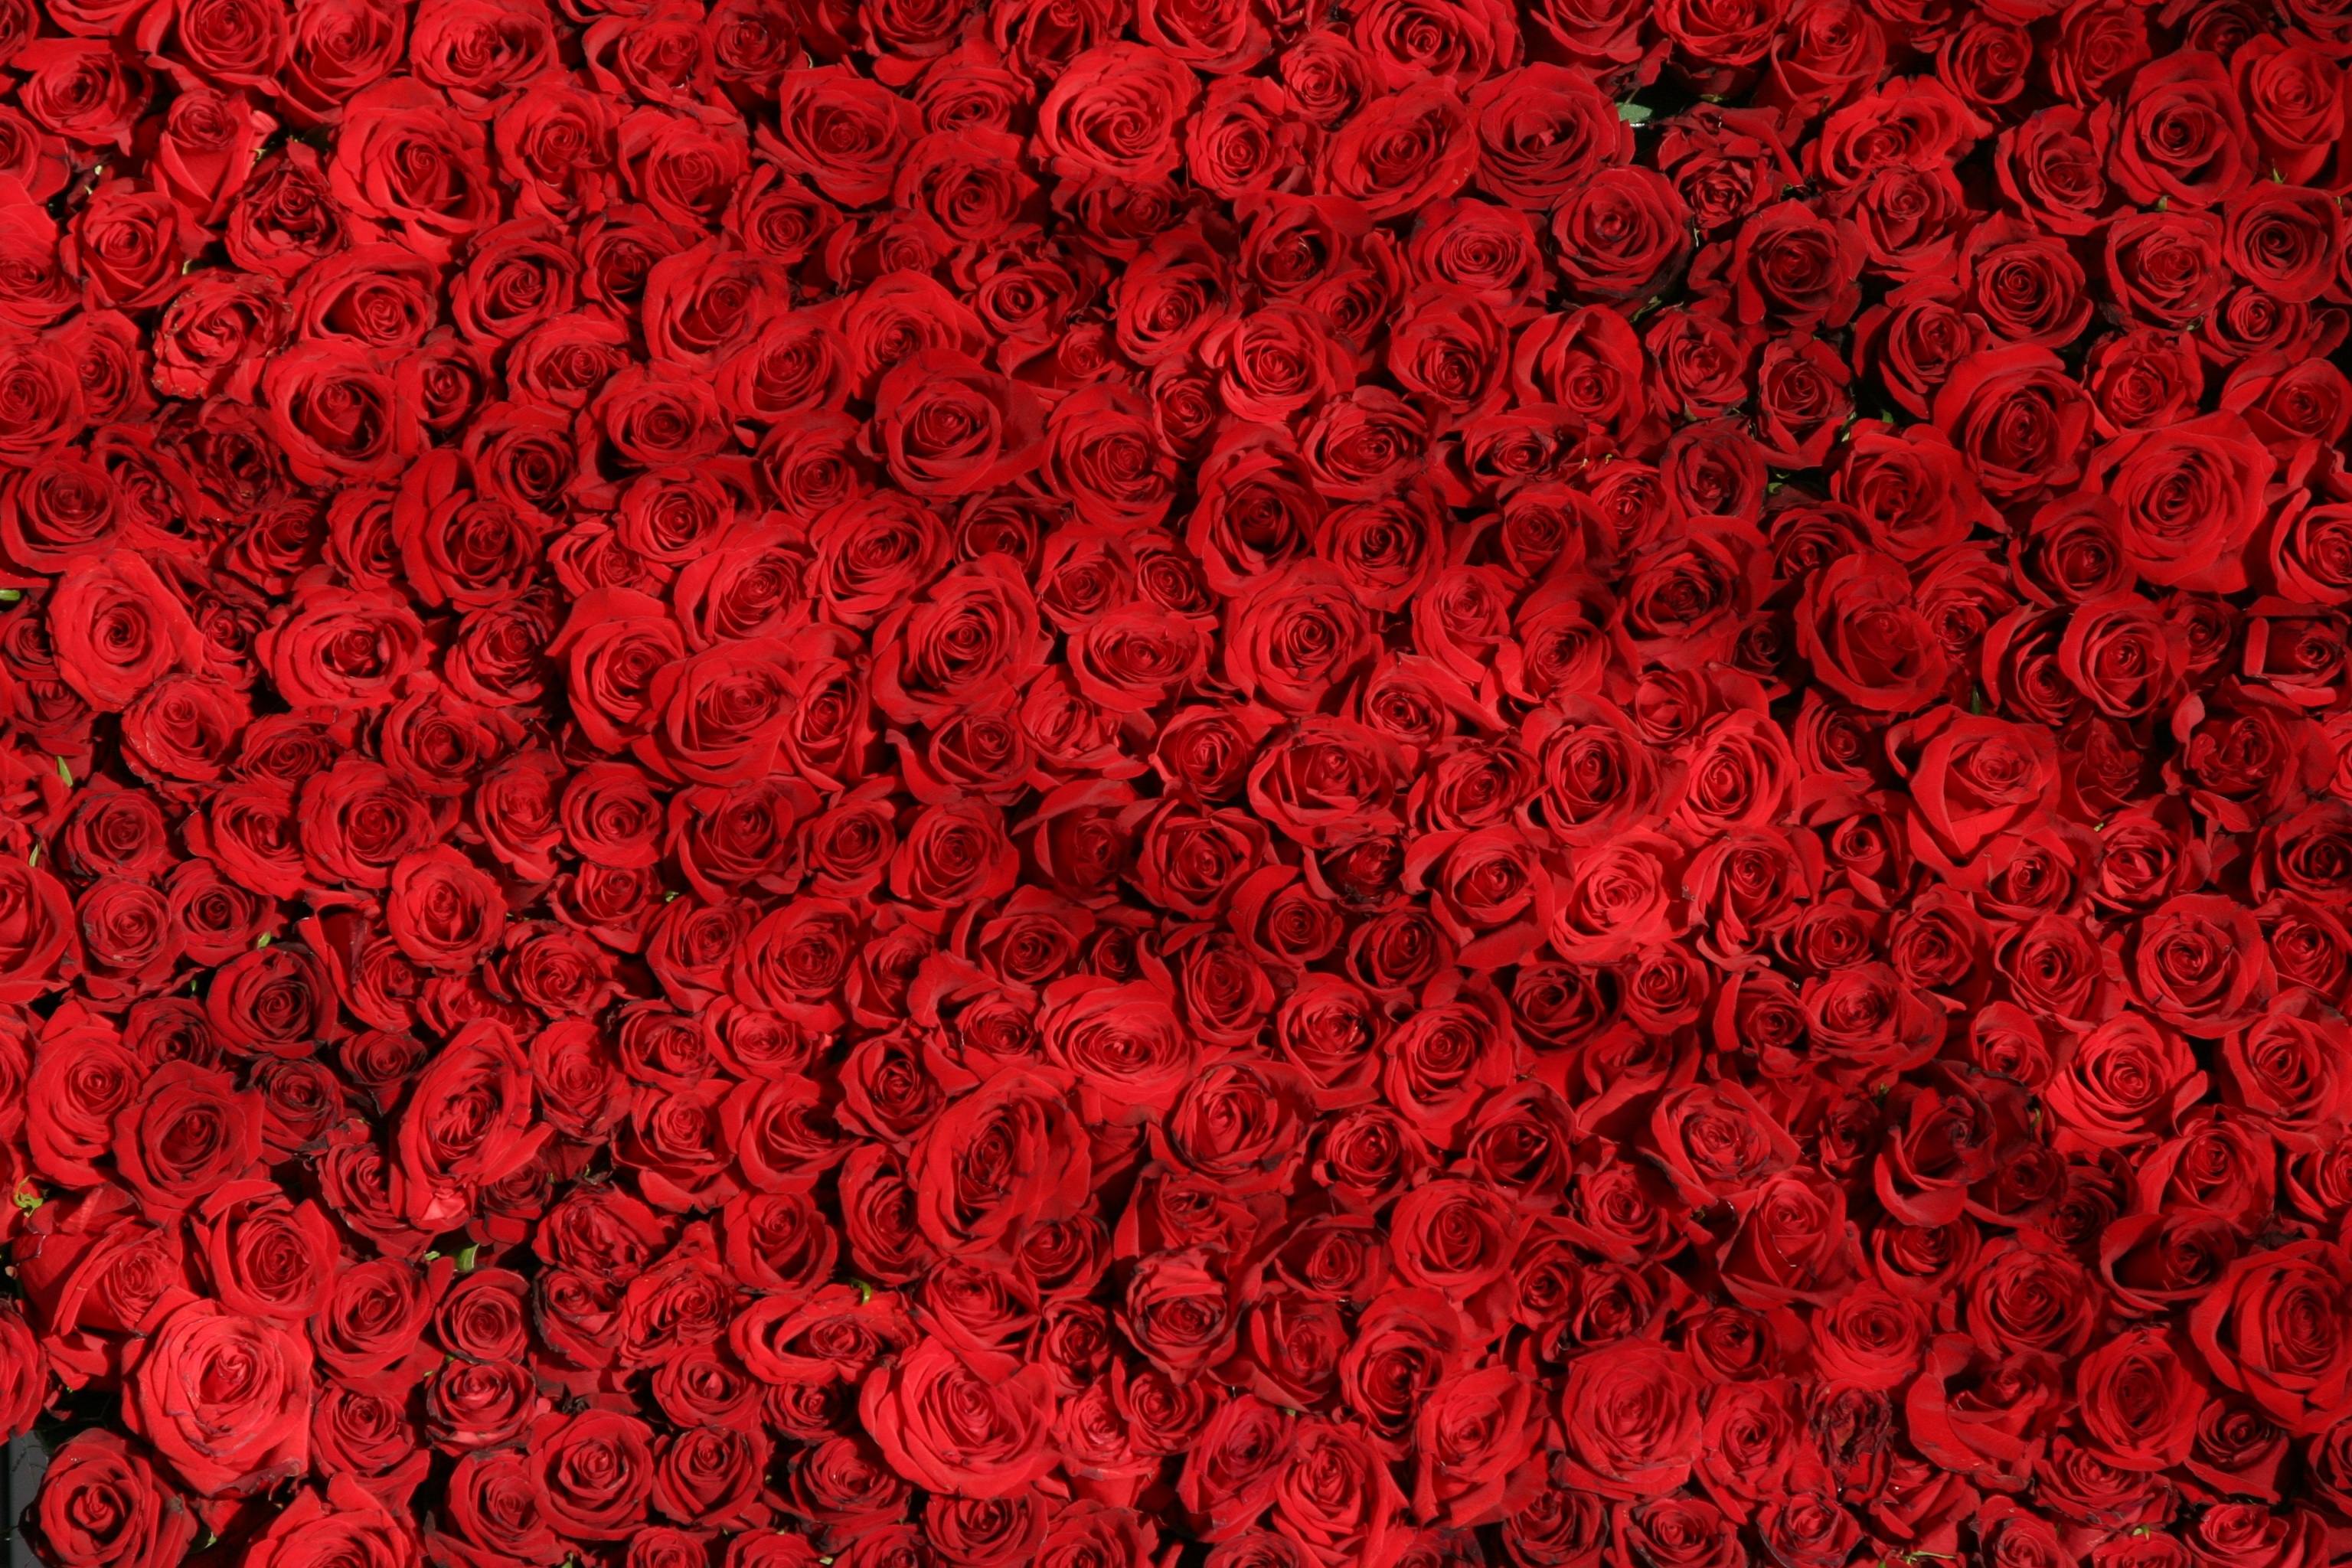 1080p pic lot, flowers, red, surface